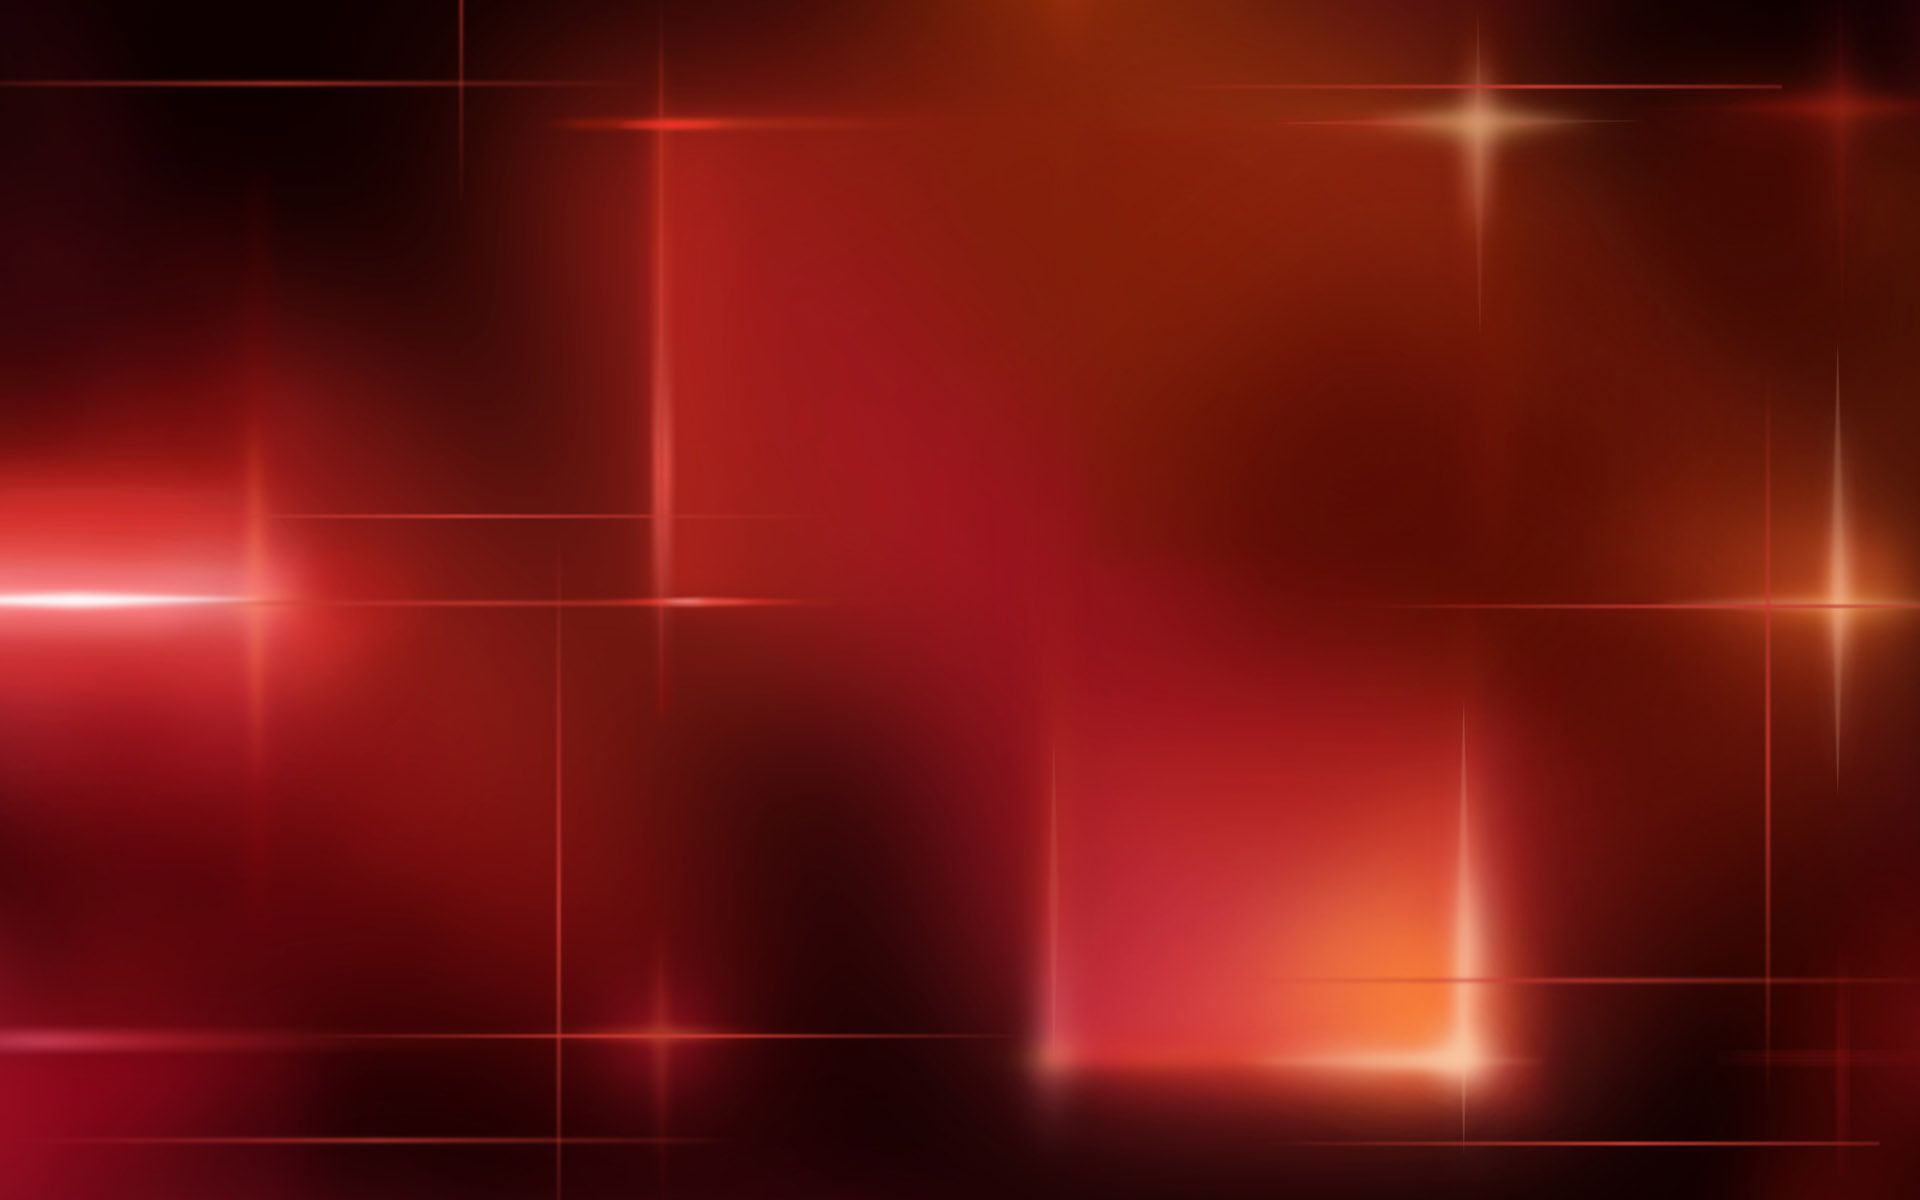 40 Crisp Red Wallpapers For Desktop, Laptop and Tablet Devices